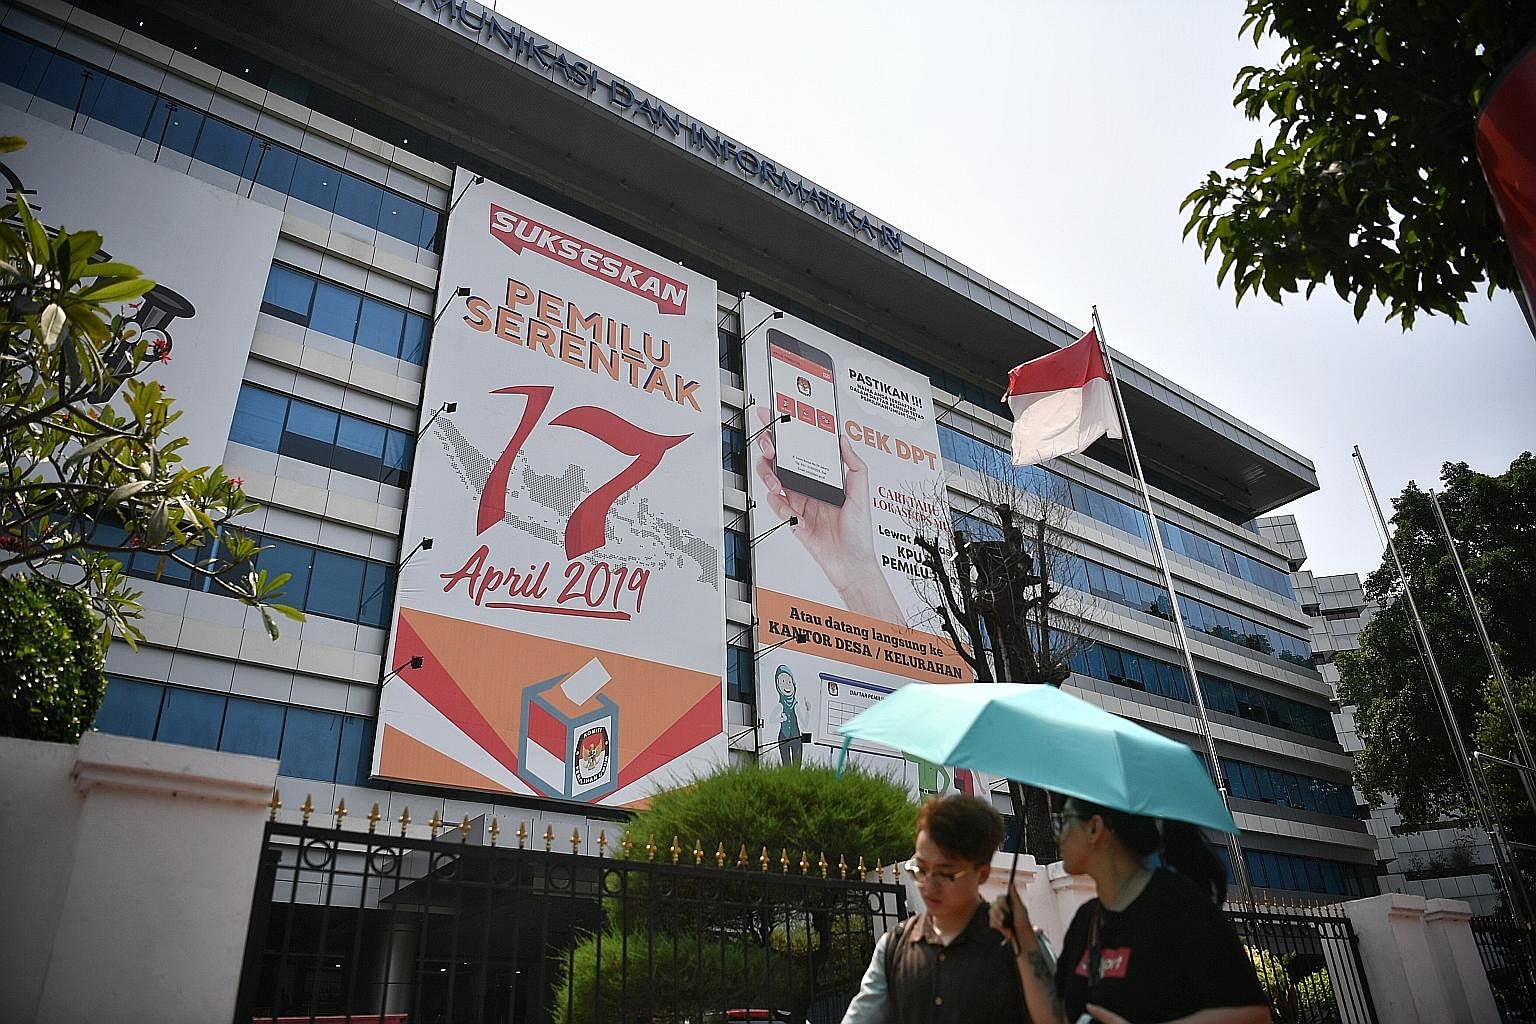 An election poster hanging outside the Ministry of Communication and Information Technology in Central Jakarta, Indonesia. Rumours abound as polling day approaches, with the General Elections Commission accused of vote rigging and the Indonesian air 